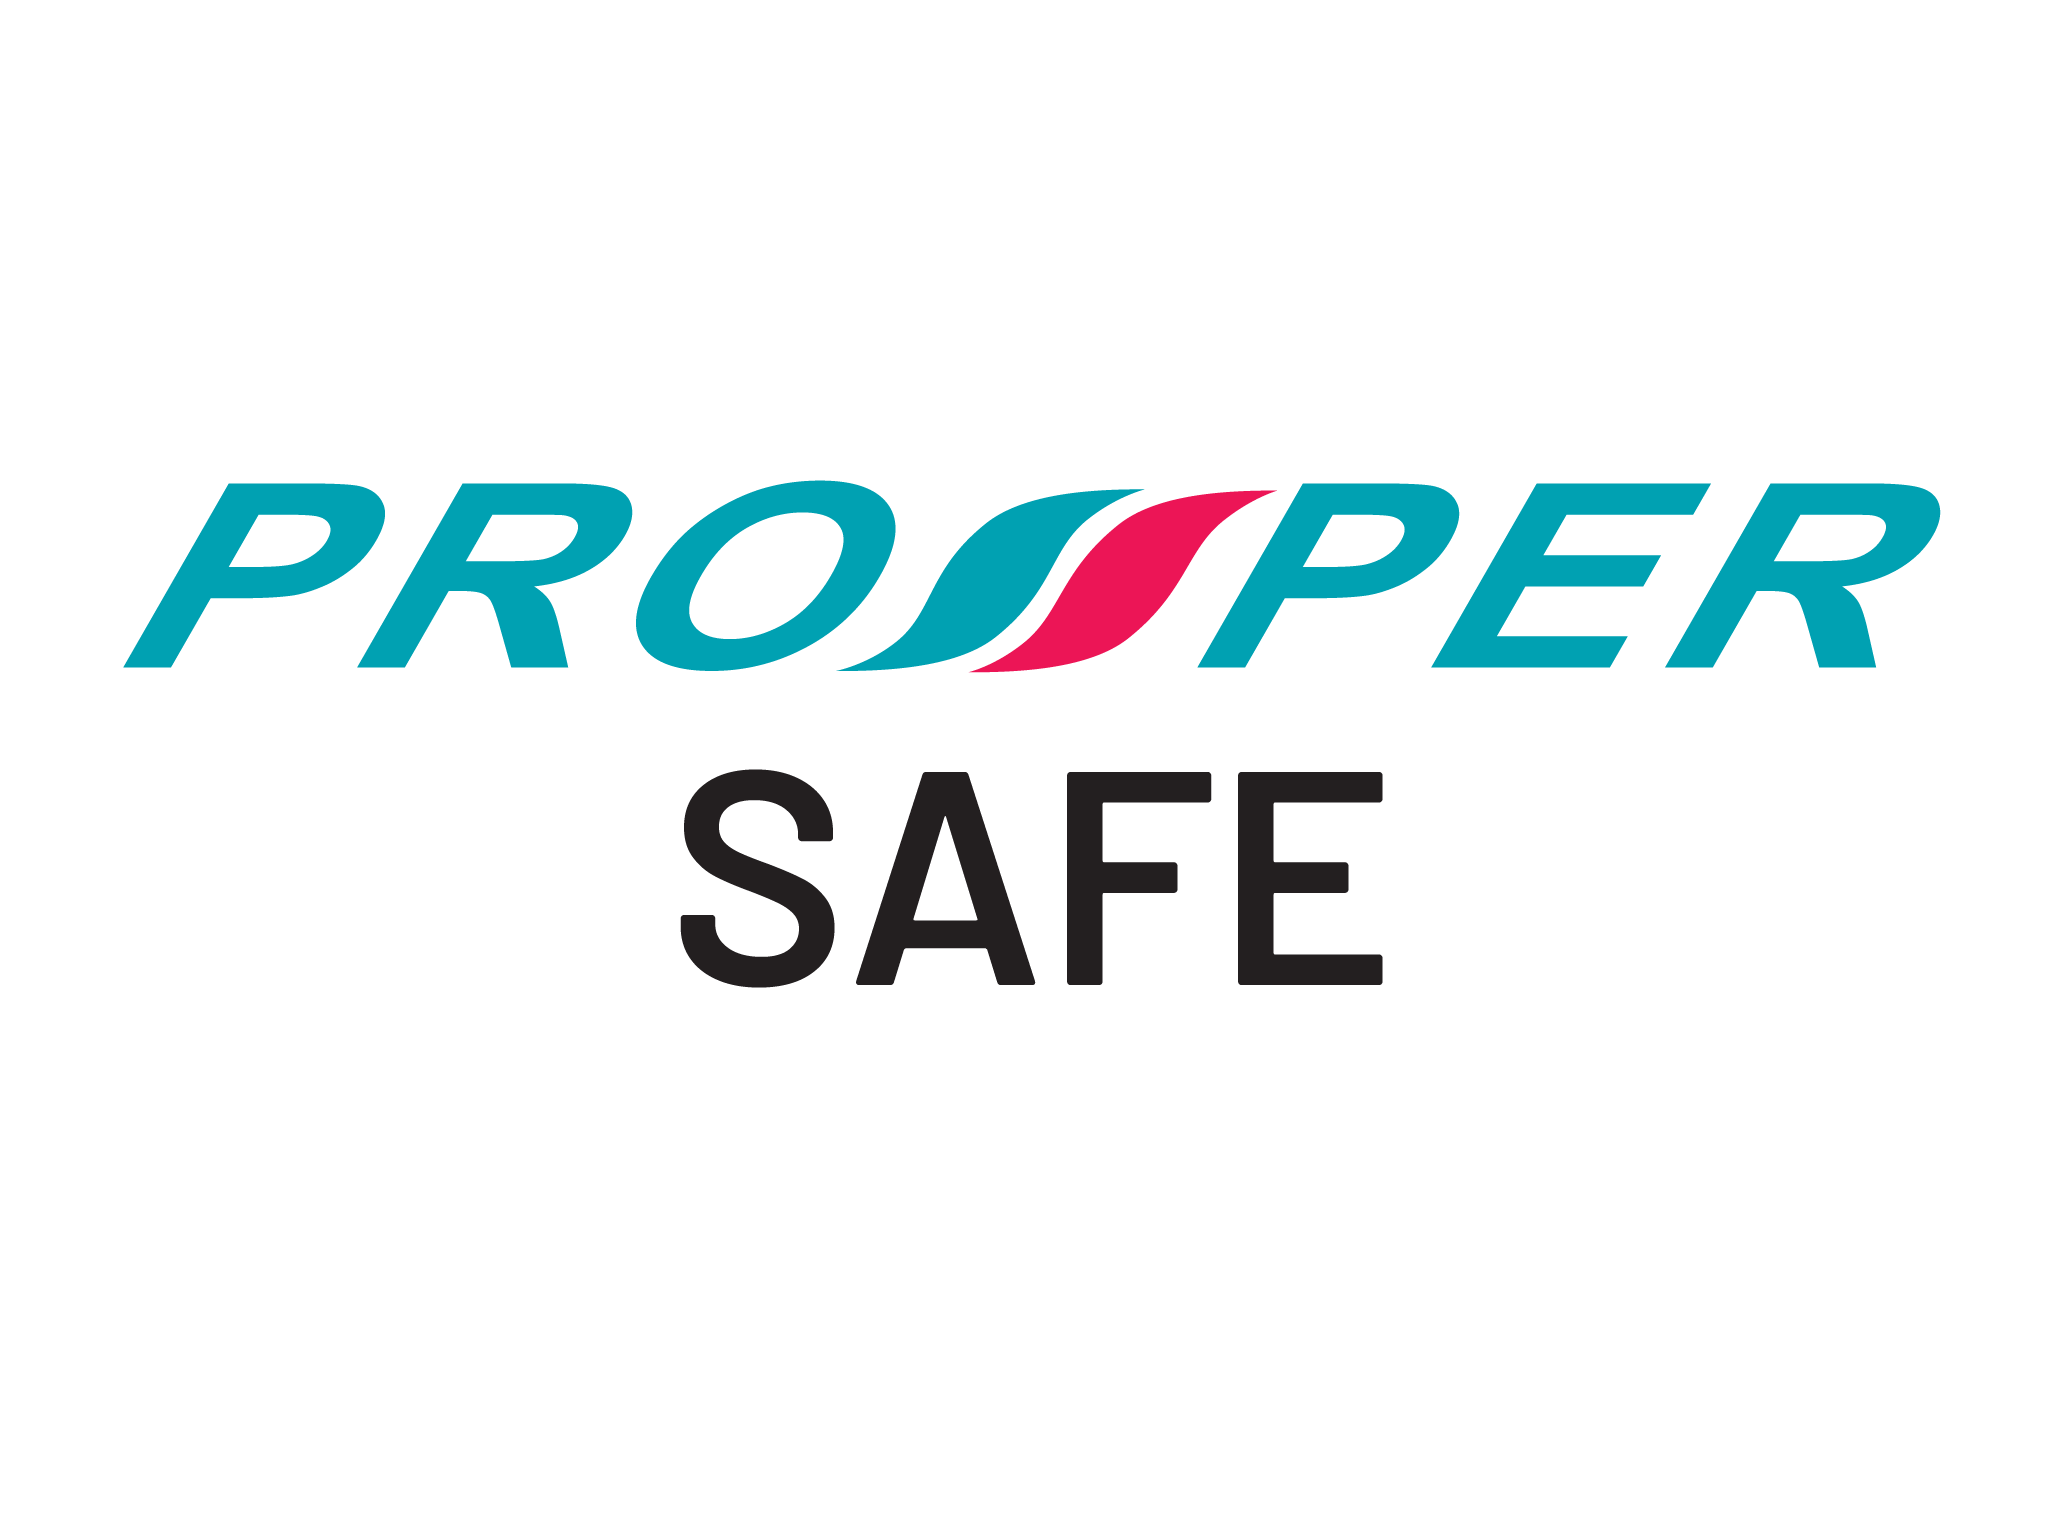 PROSPER SAFE (Sustainable Assistance for Flood and Environment Disaster) is a financing initiative for Rakan Usahawan PUNB businesses affected by floods or natural disasters.